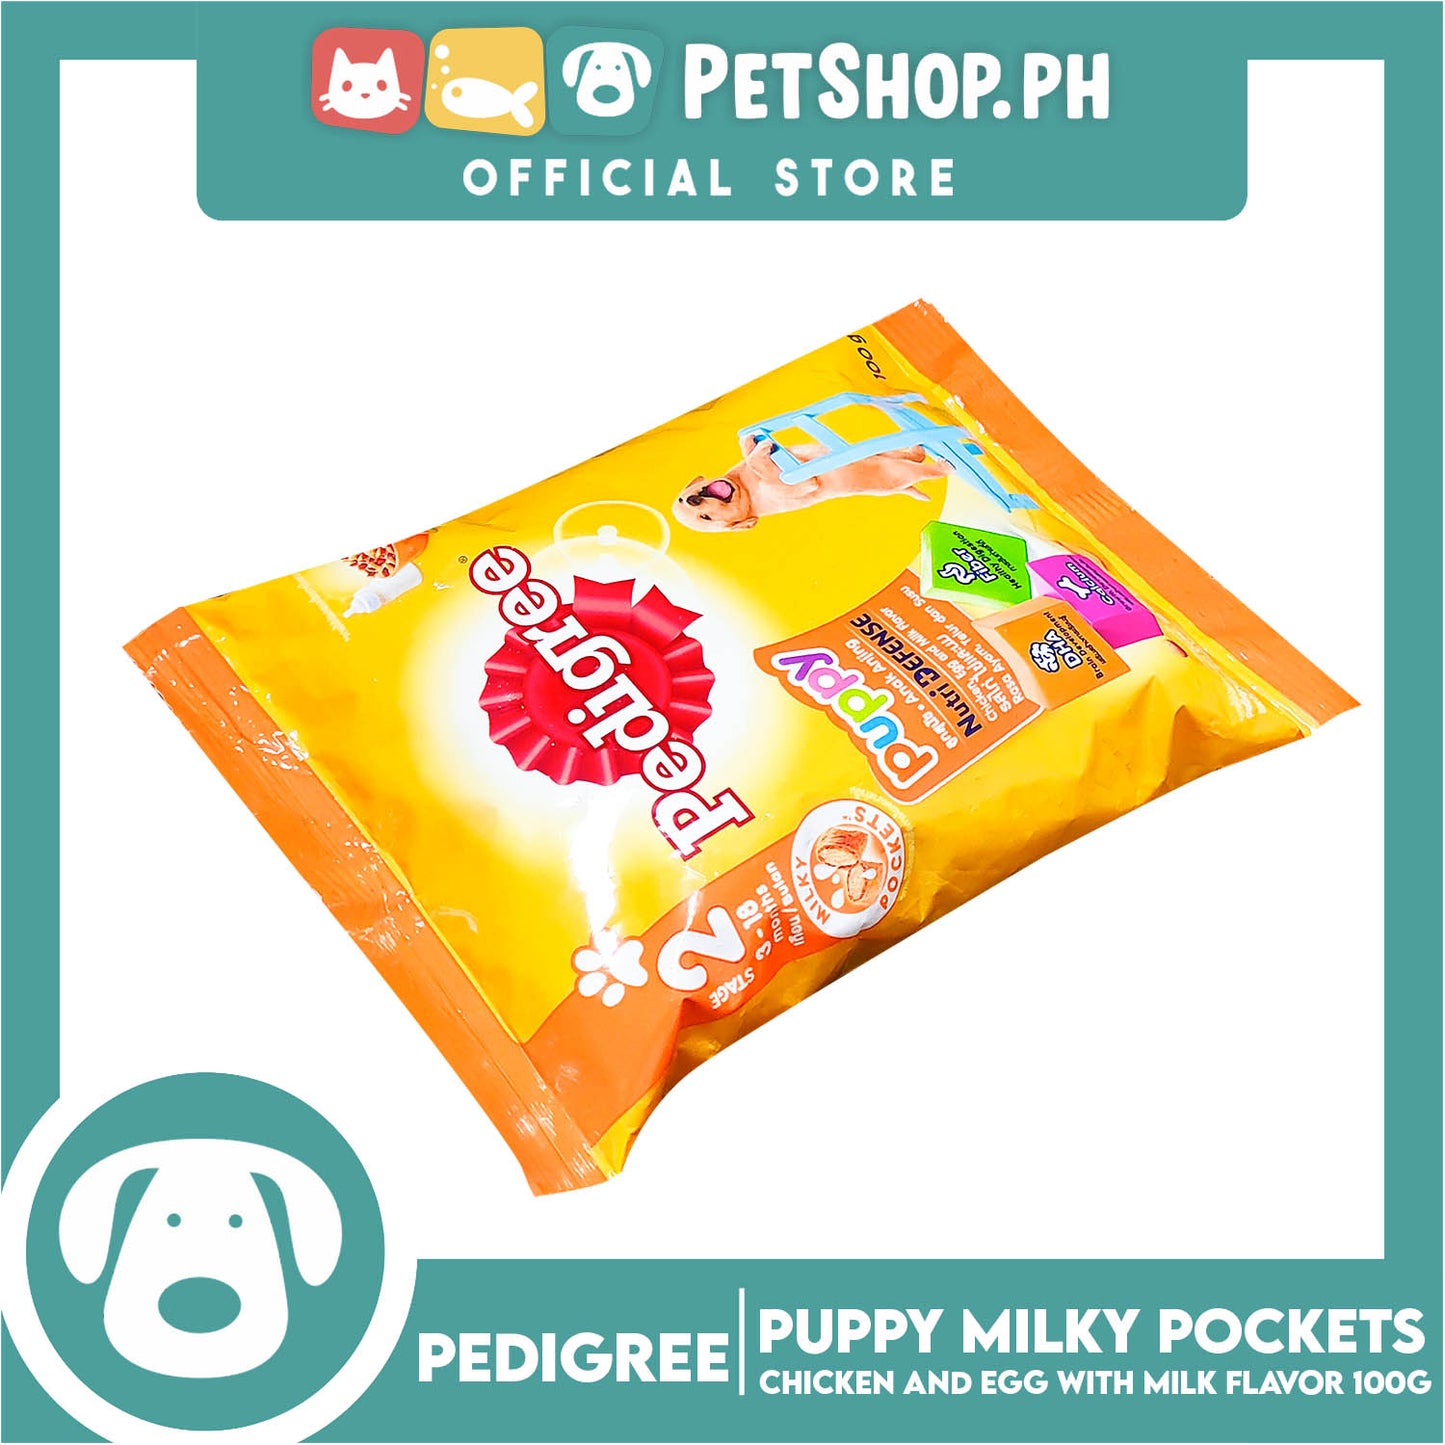 12pcs Pedigree Nutri Defense For Puppy Chicken, Egg And Milk Flavor 100g (Stage 2 For 3-18 Months) Milky Pockets, Dog Dry Food